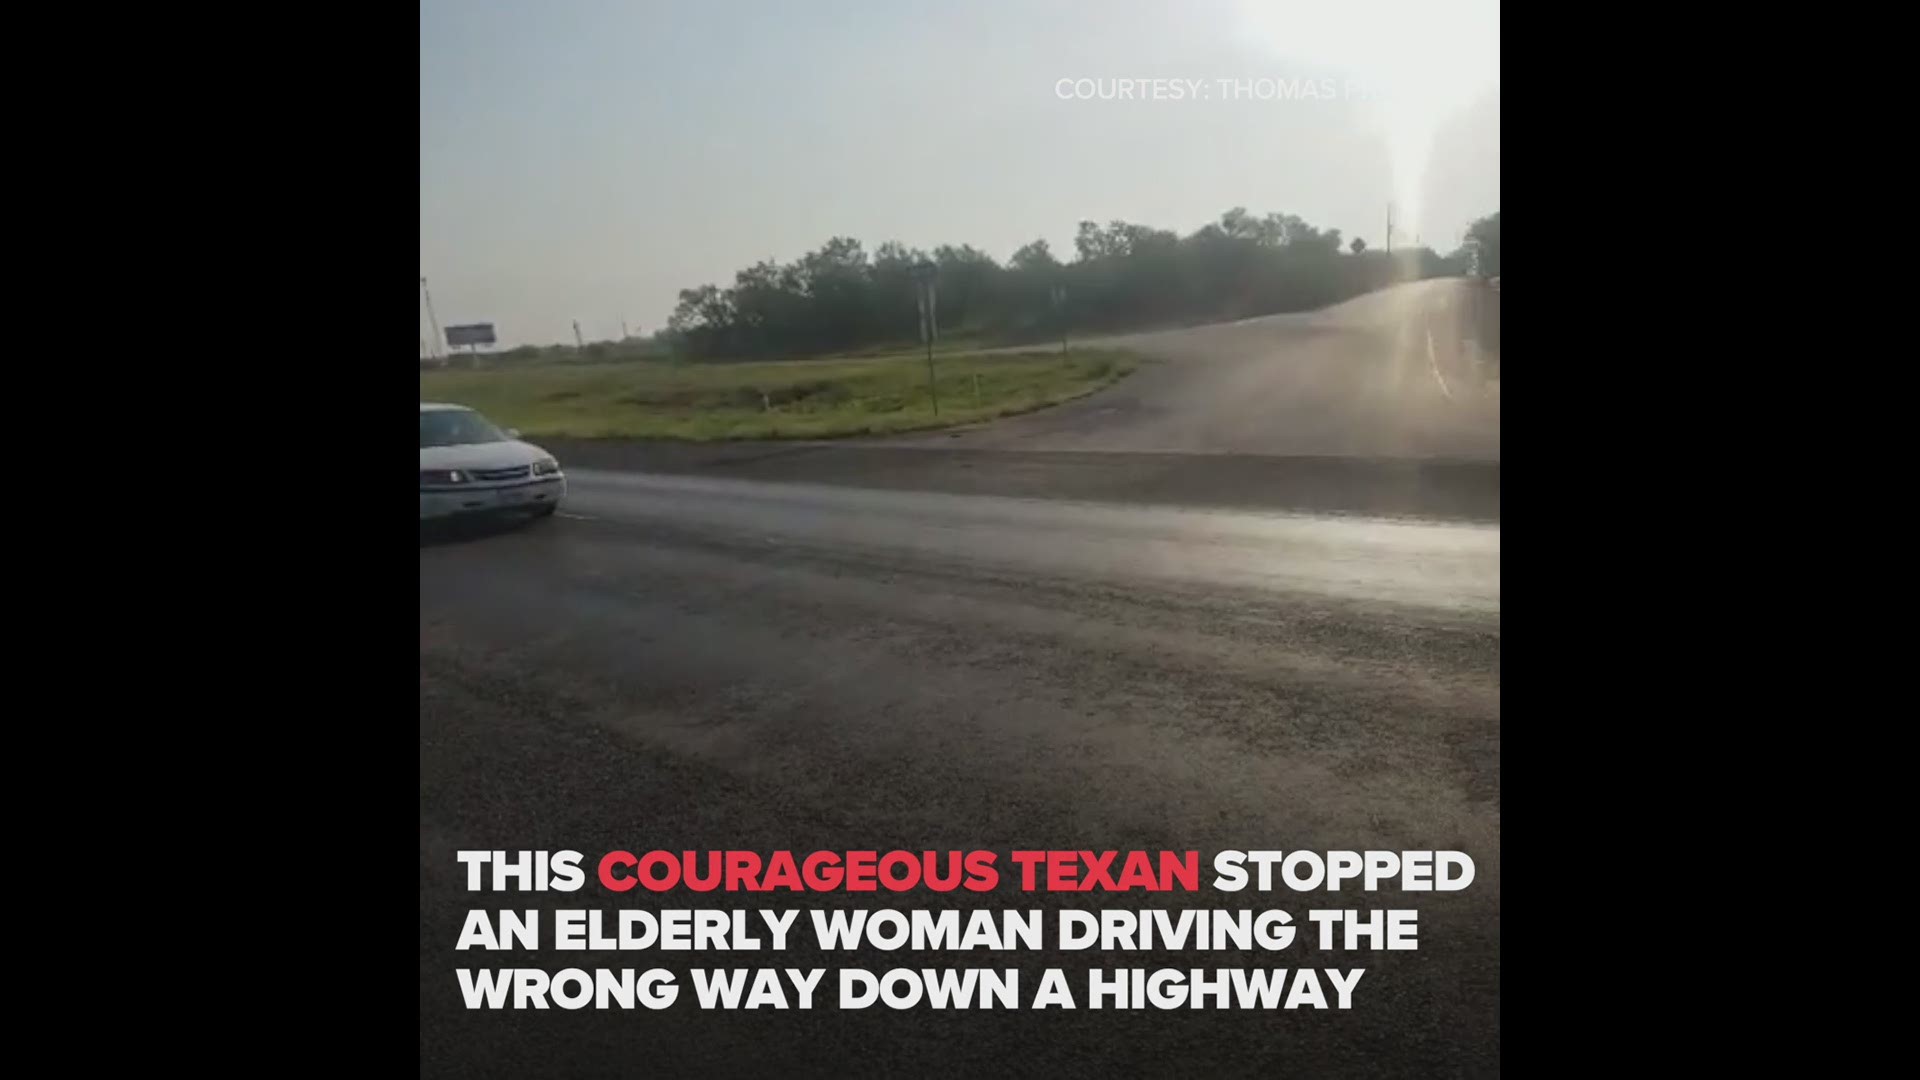 Thomas Prado took matters into his own hands when he saw a fellow Texan heading the wrong way down a highway. WFAA.com